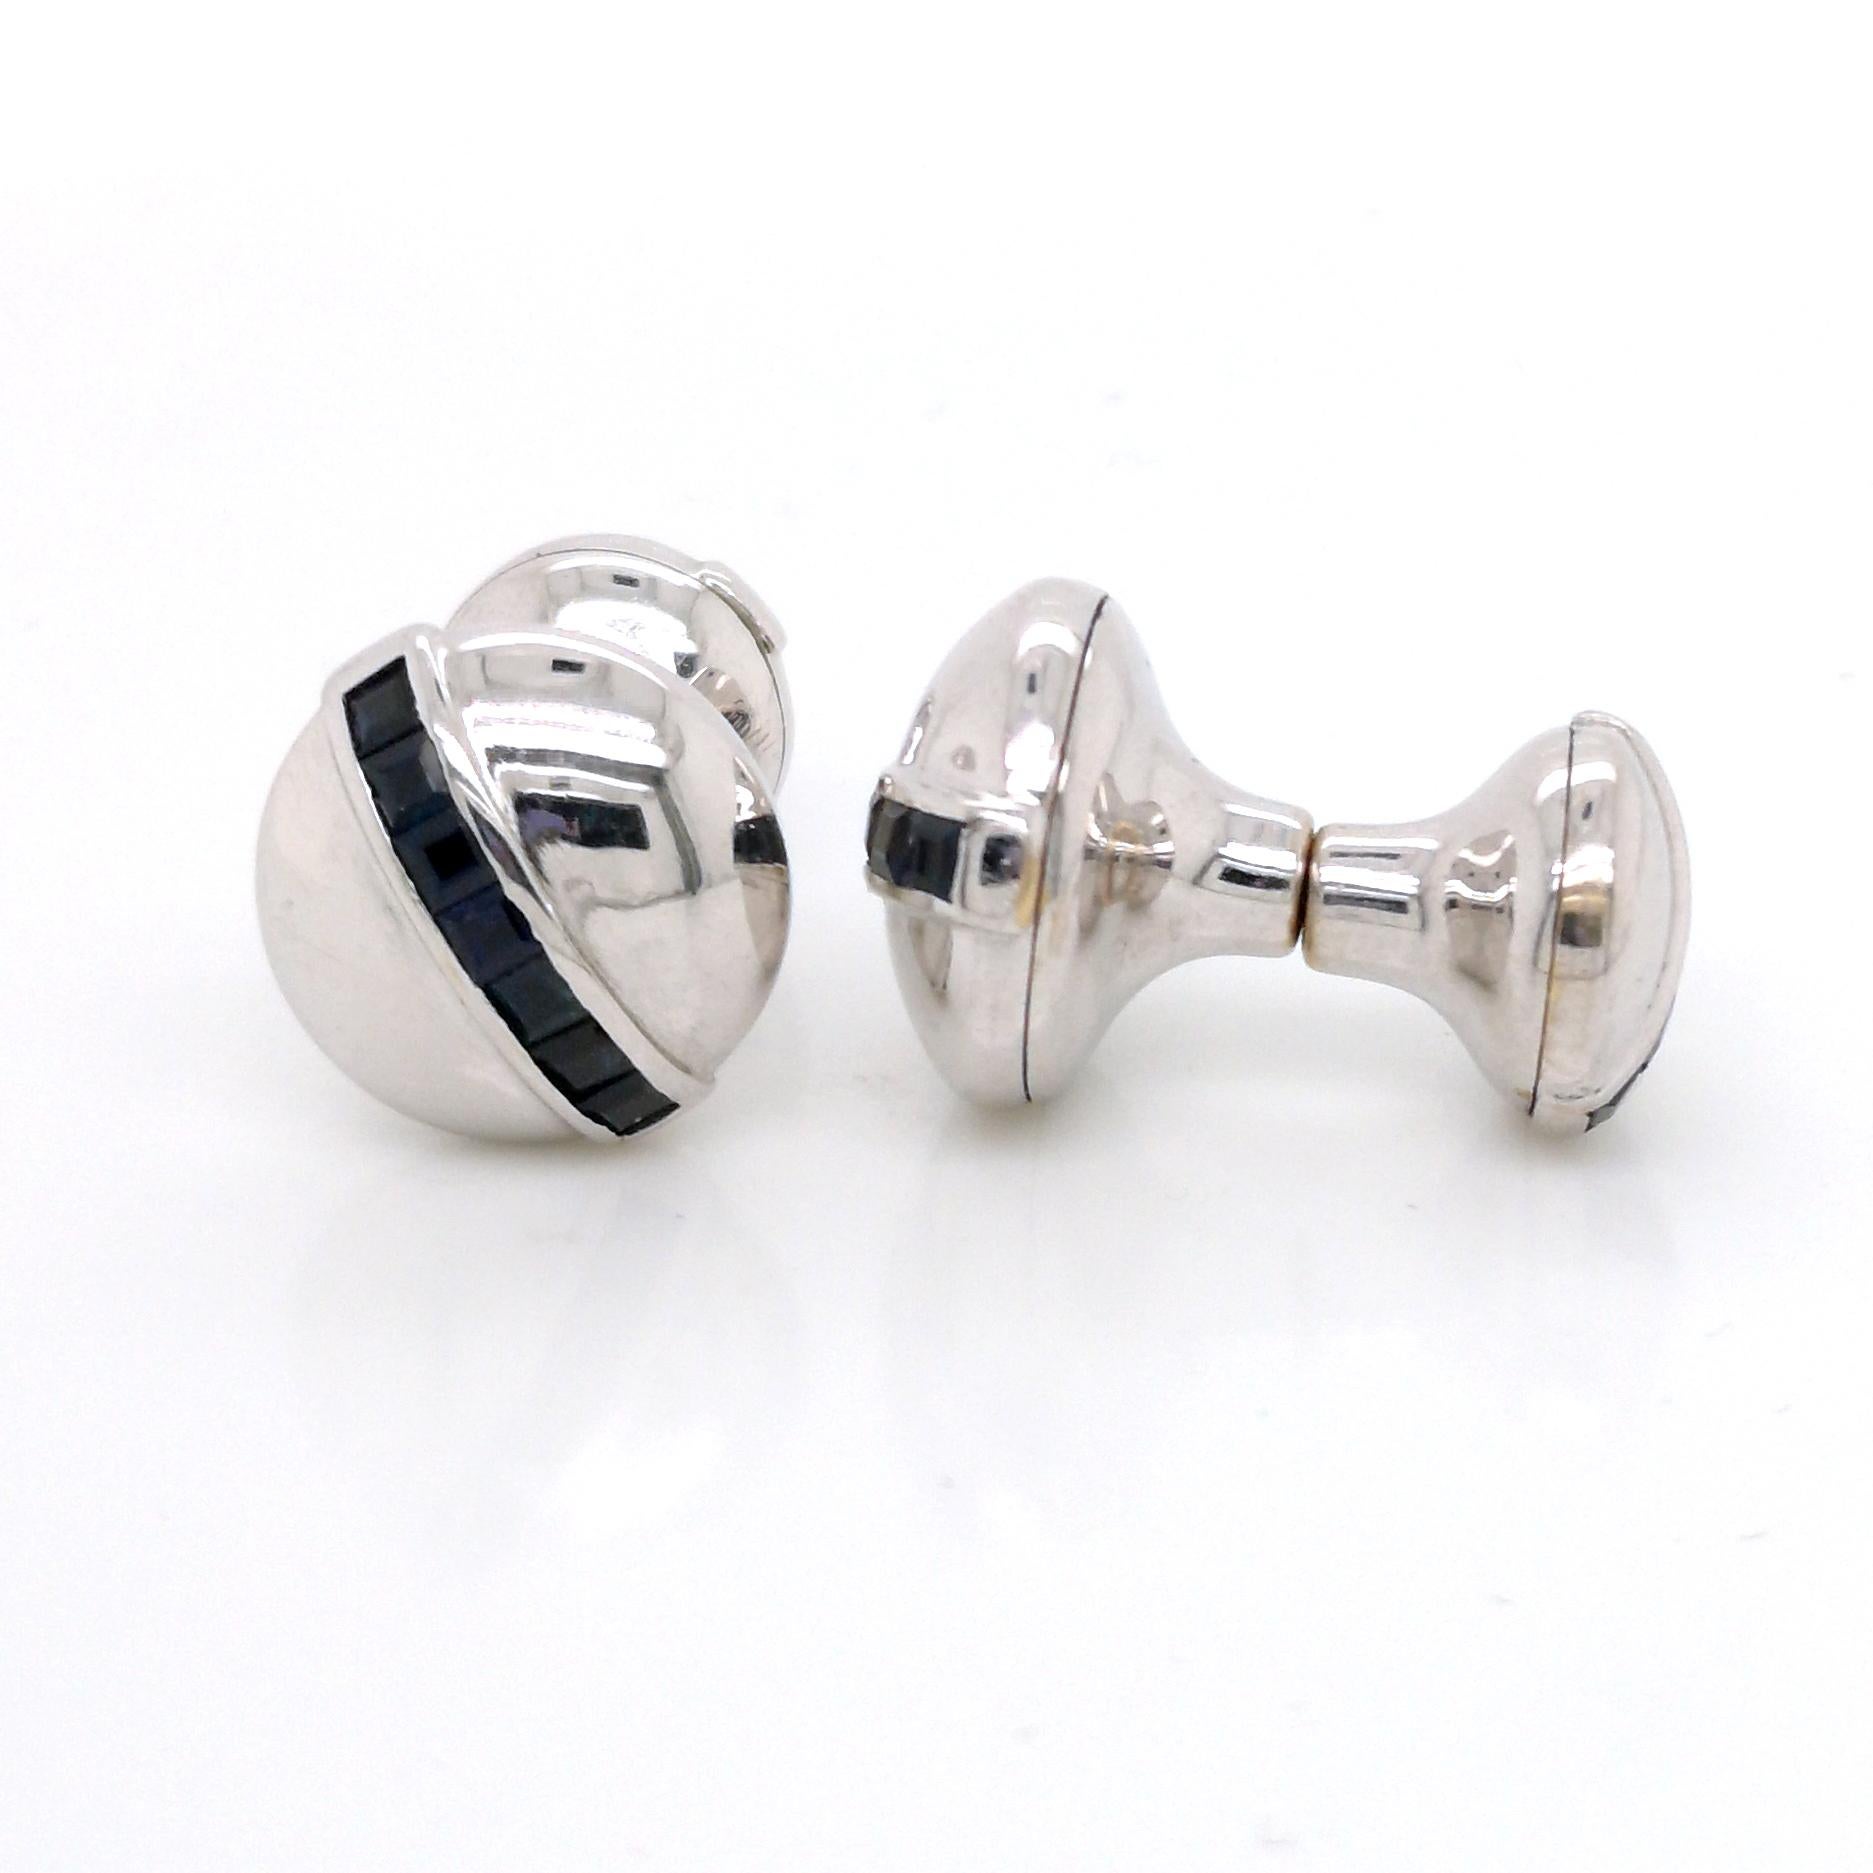 A pair of white gold cufflinks, comprised of a circular dome to each end, set with a single row of calibré cut sapphires, mounted in 18ct white gold, with sprung fittings.